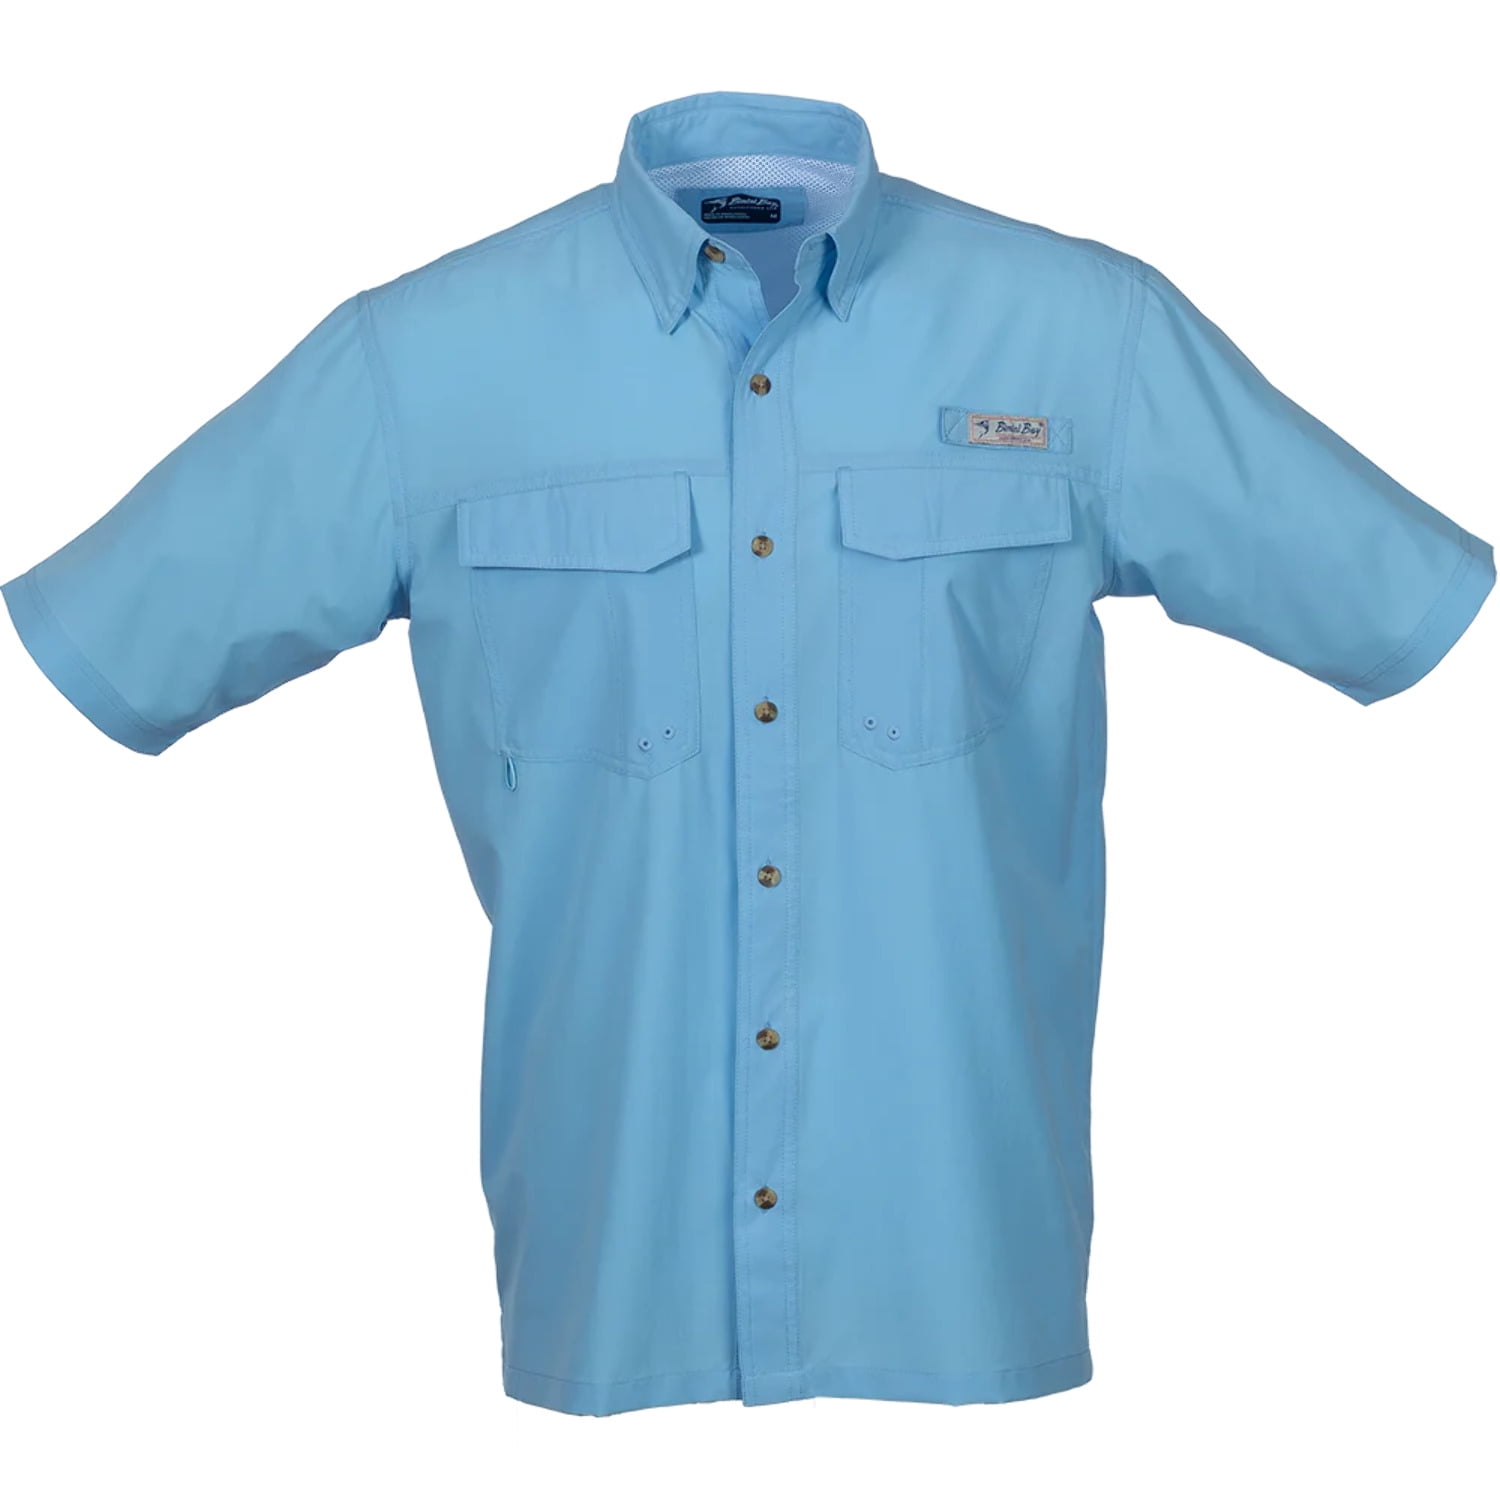 Bimini Bay Outfitters - Bimini Flats V Men's Short Sleeve Shirt Featuring  BloodGuard Plus This is the shirt that started it all. Our Bimini Bay  Outfitters Men's Flats V Short Sleeve Shirt